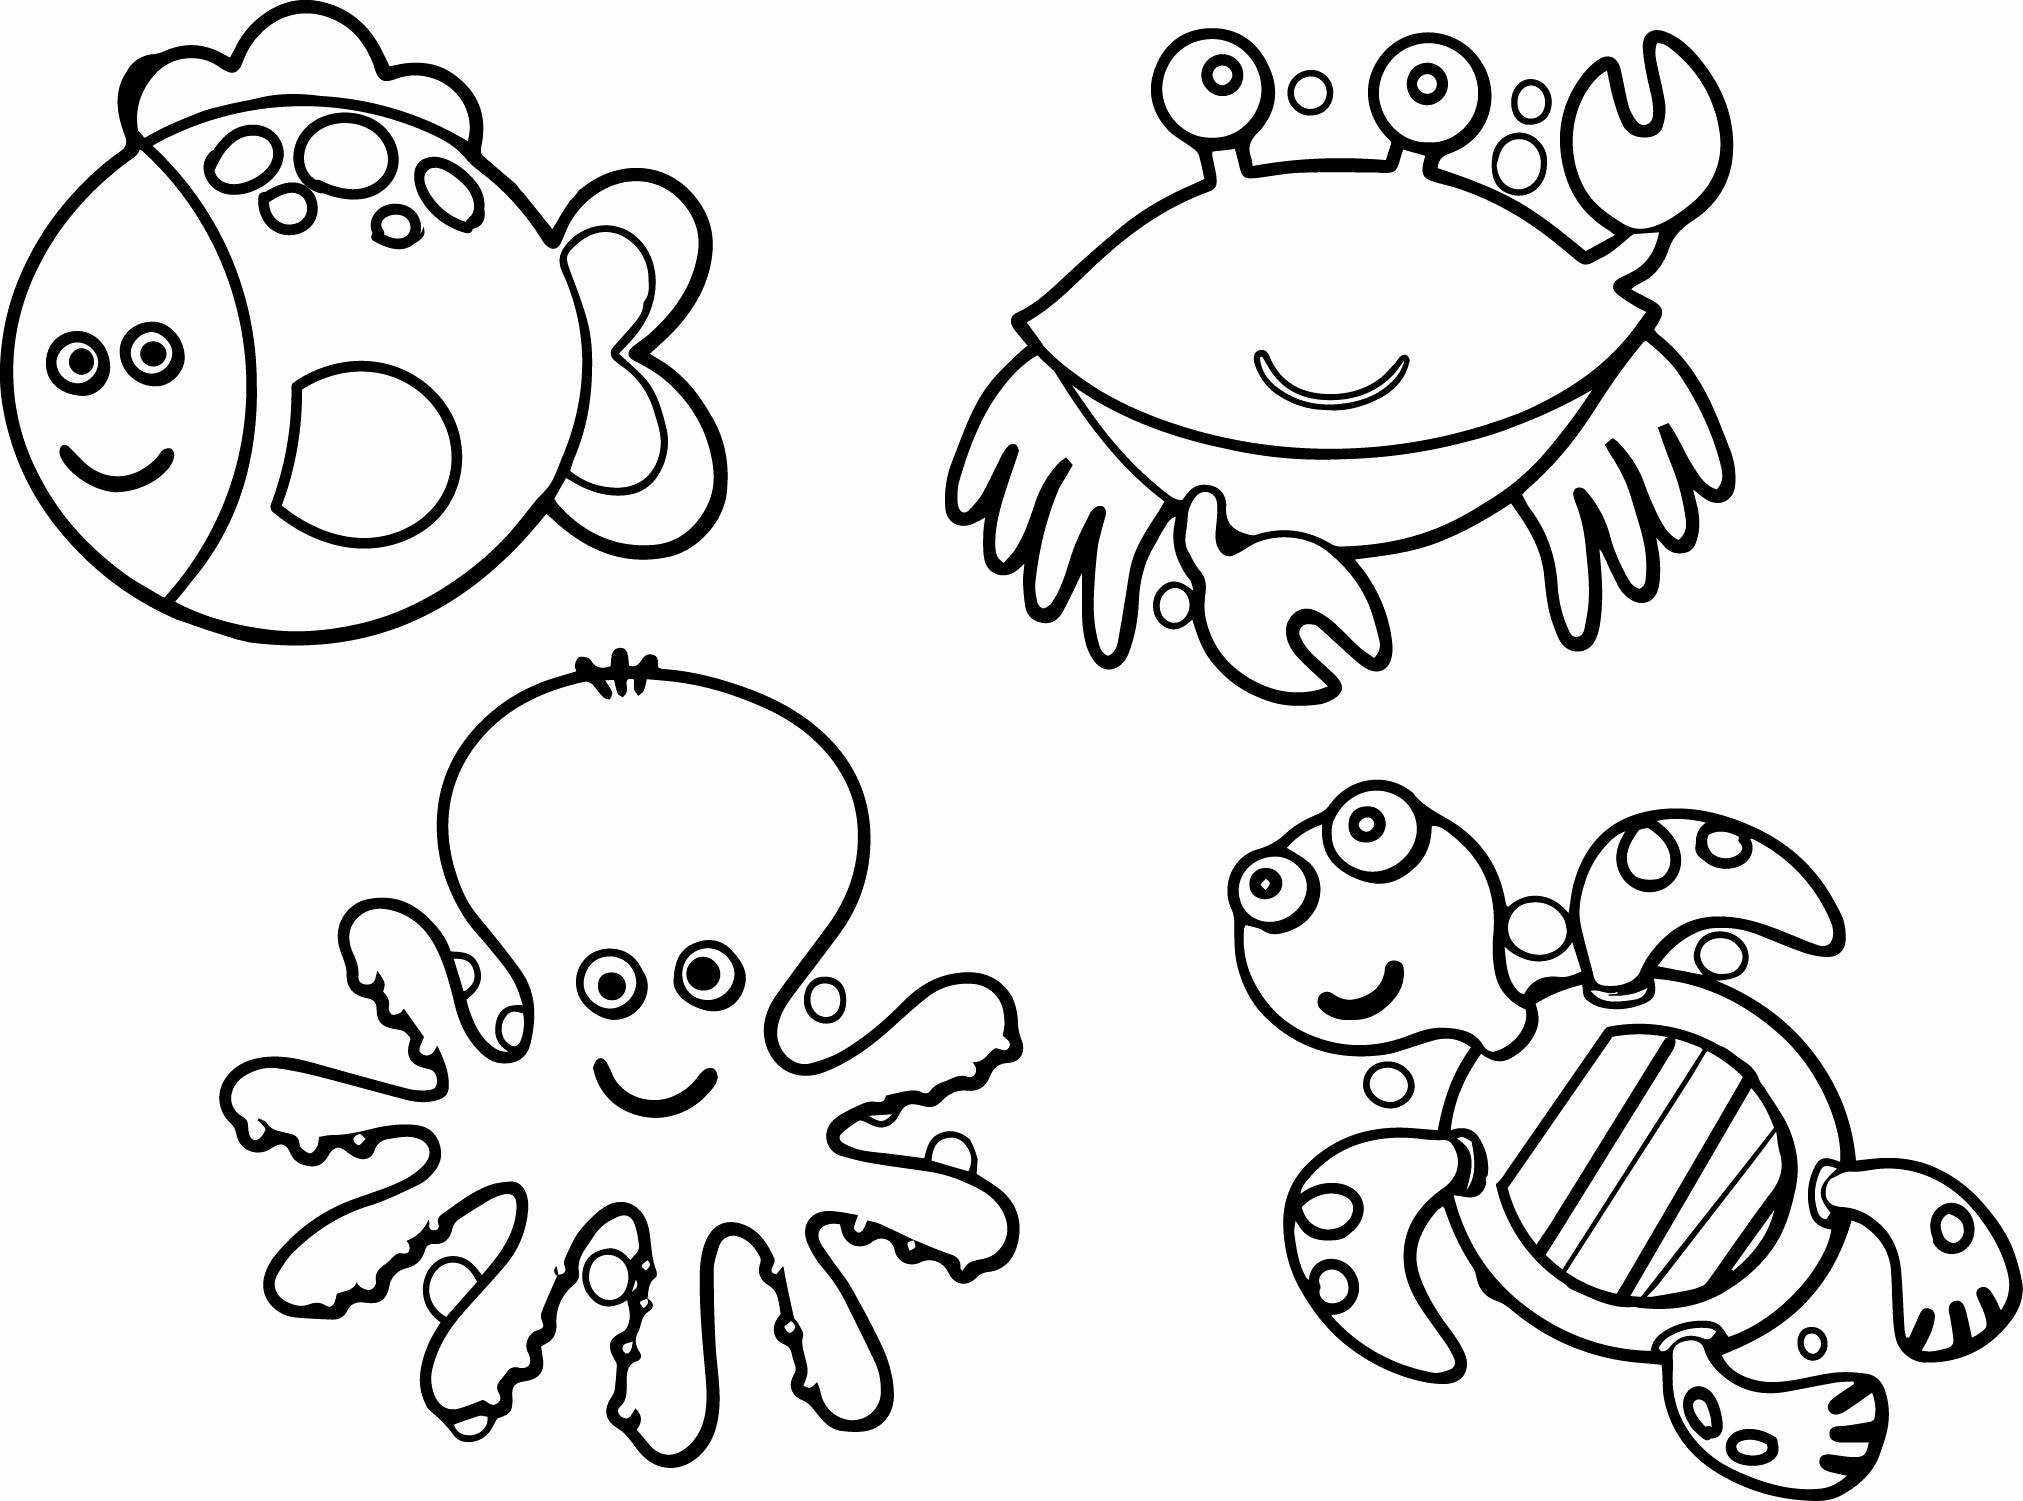 Animal Coloring Pages For Kids
 Animal Coloring Pages Best Coloring Pages For Kids